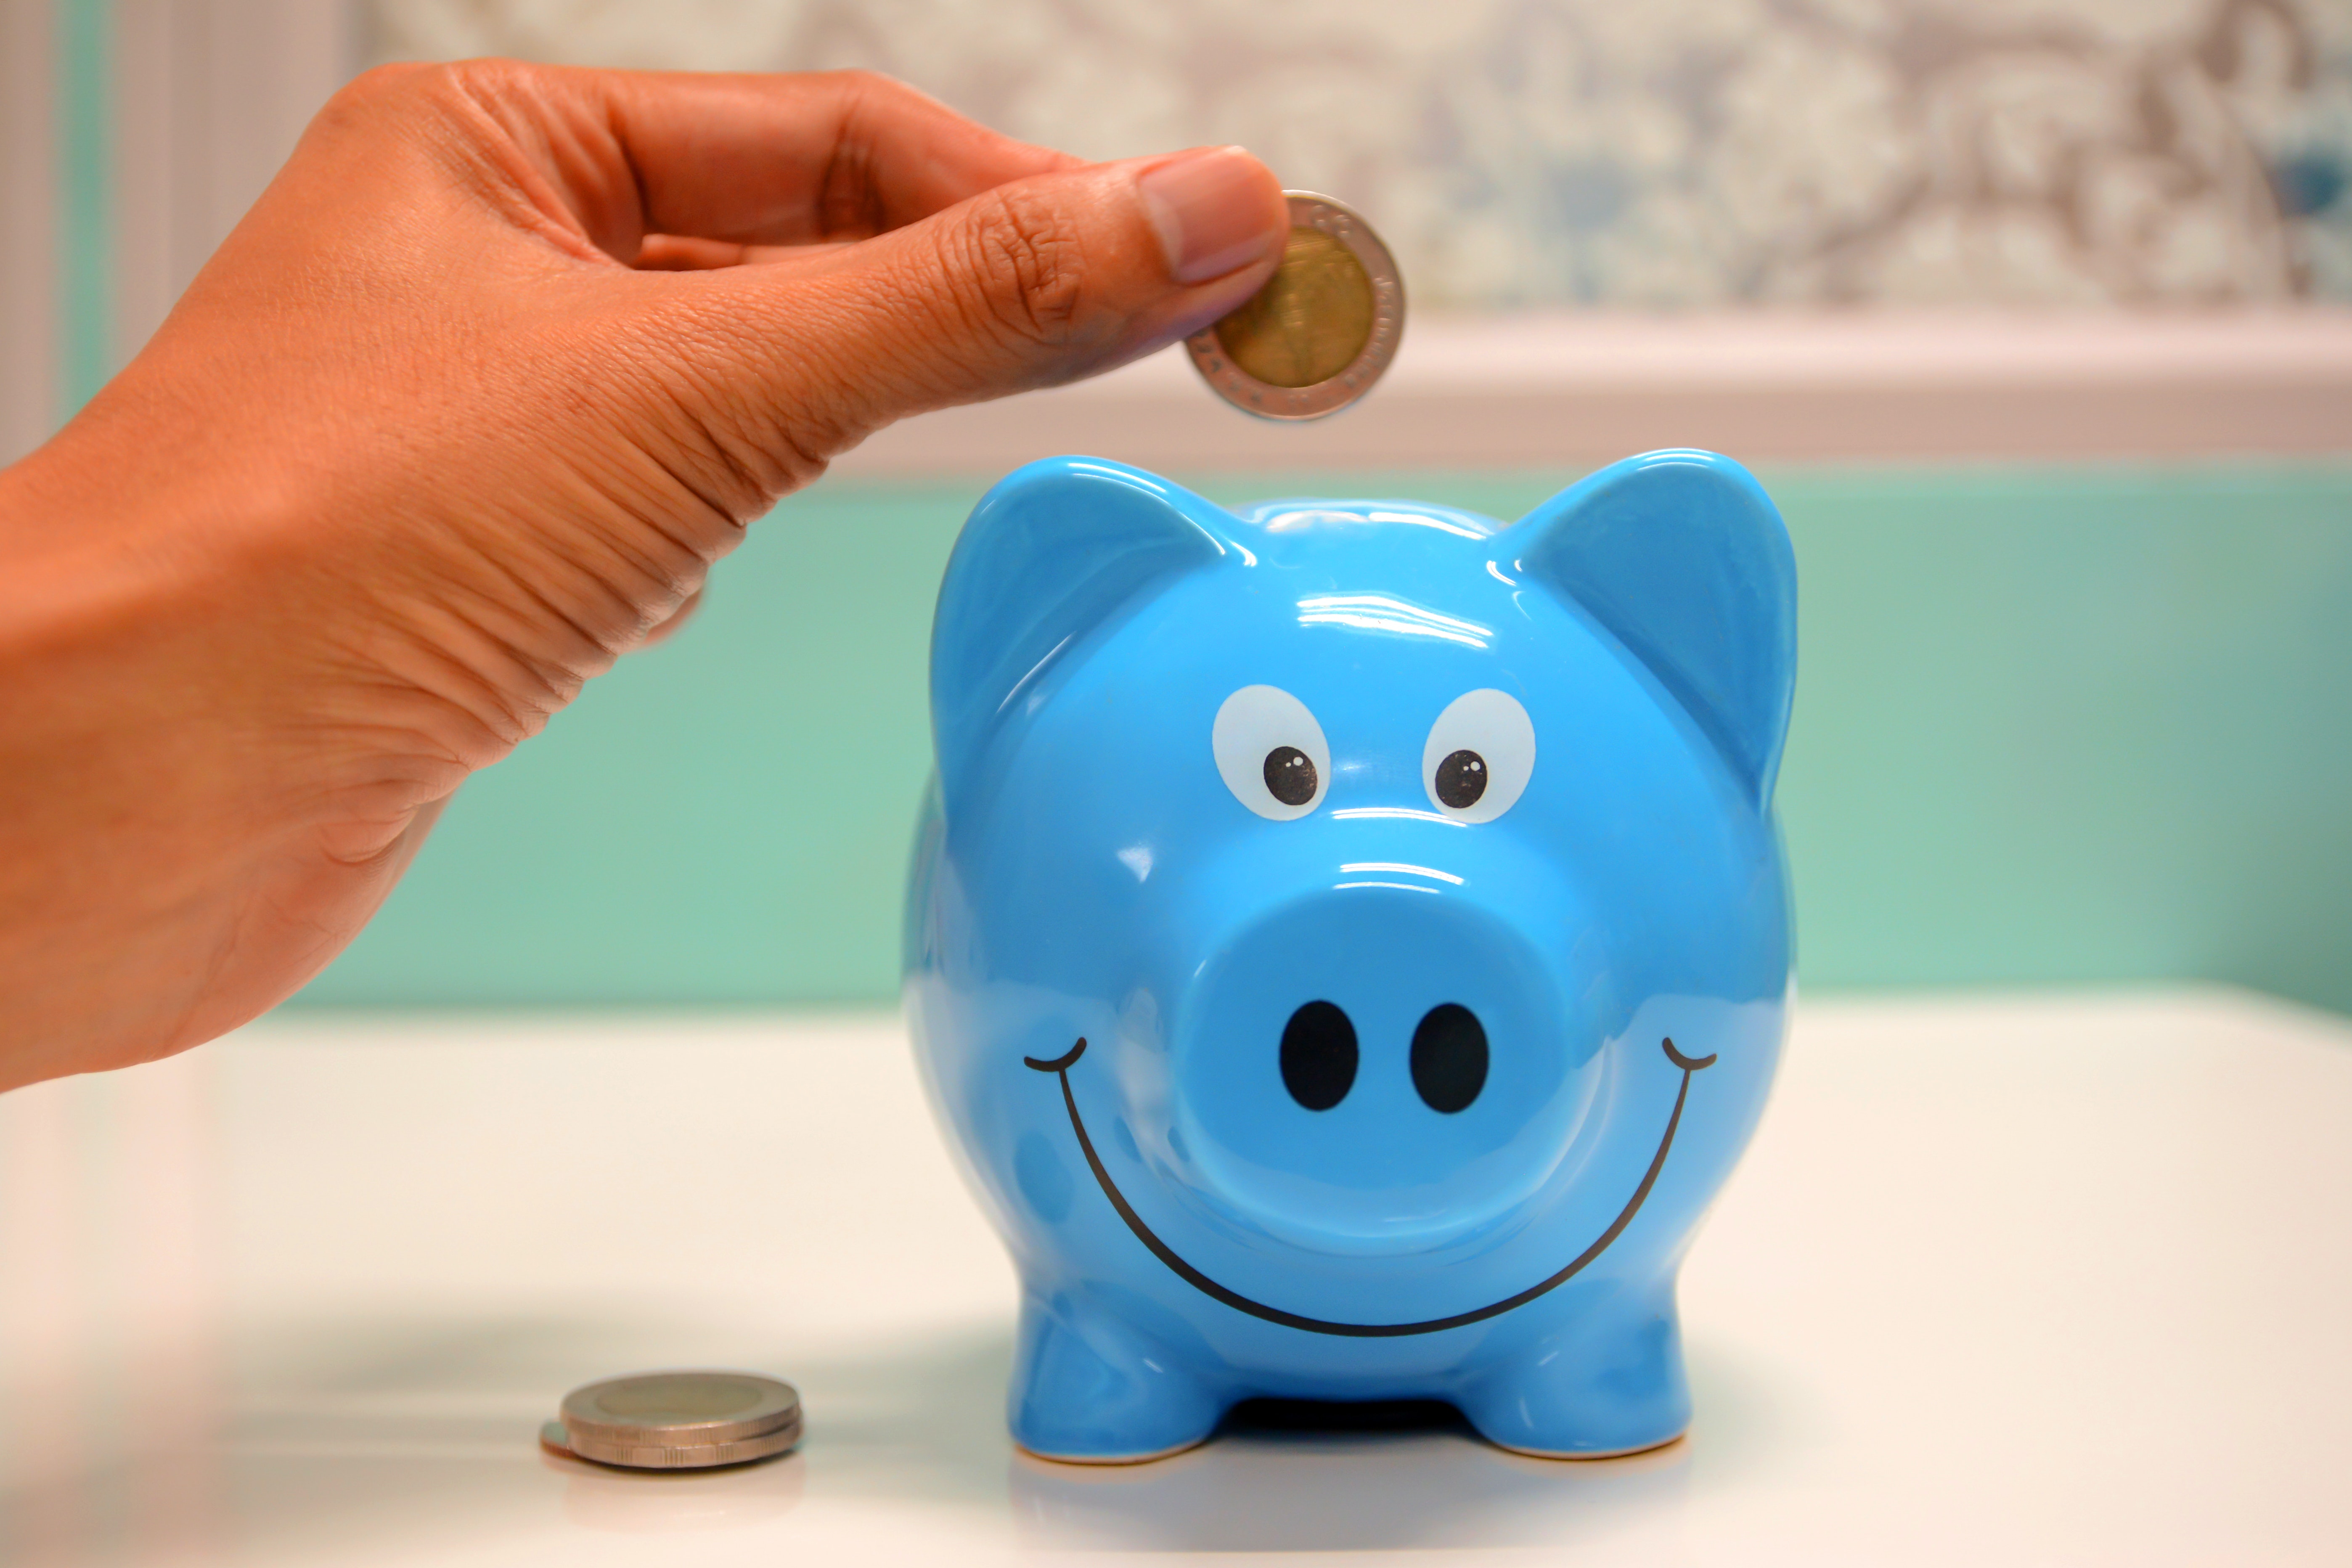 Practicing financial literacy by putting coins in a piggy bank